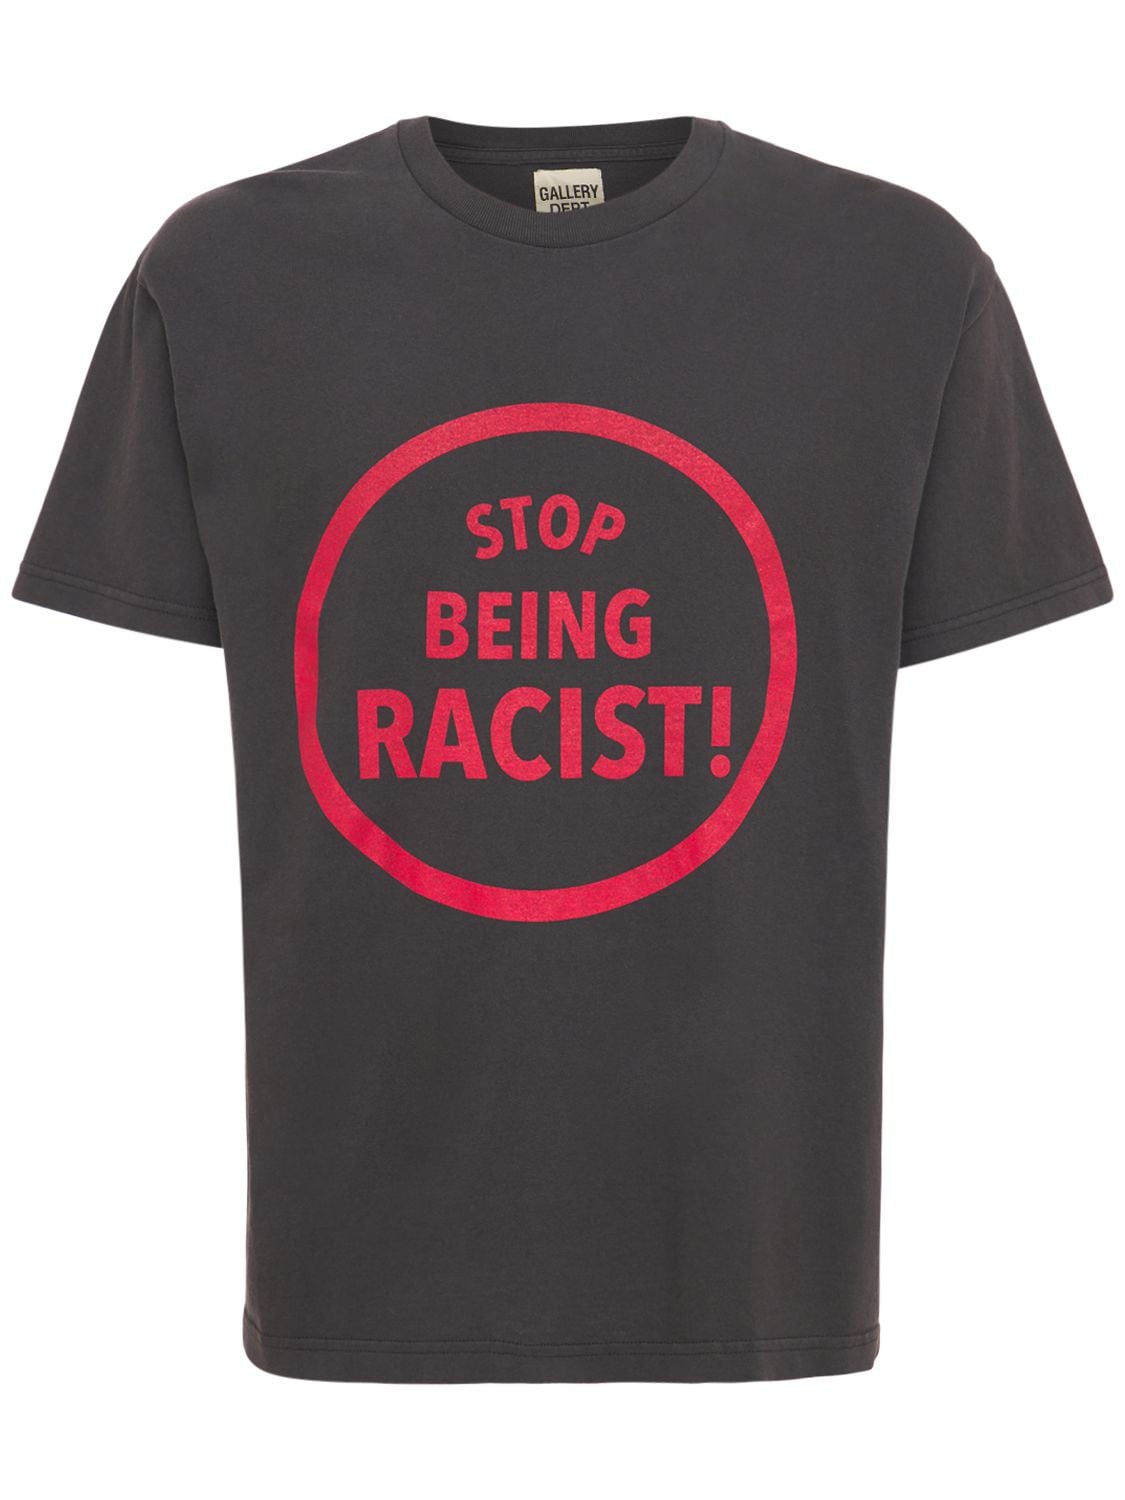 GALLERY DEPT. Stop Being Racist Printed Jersey T-shirt